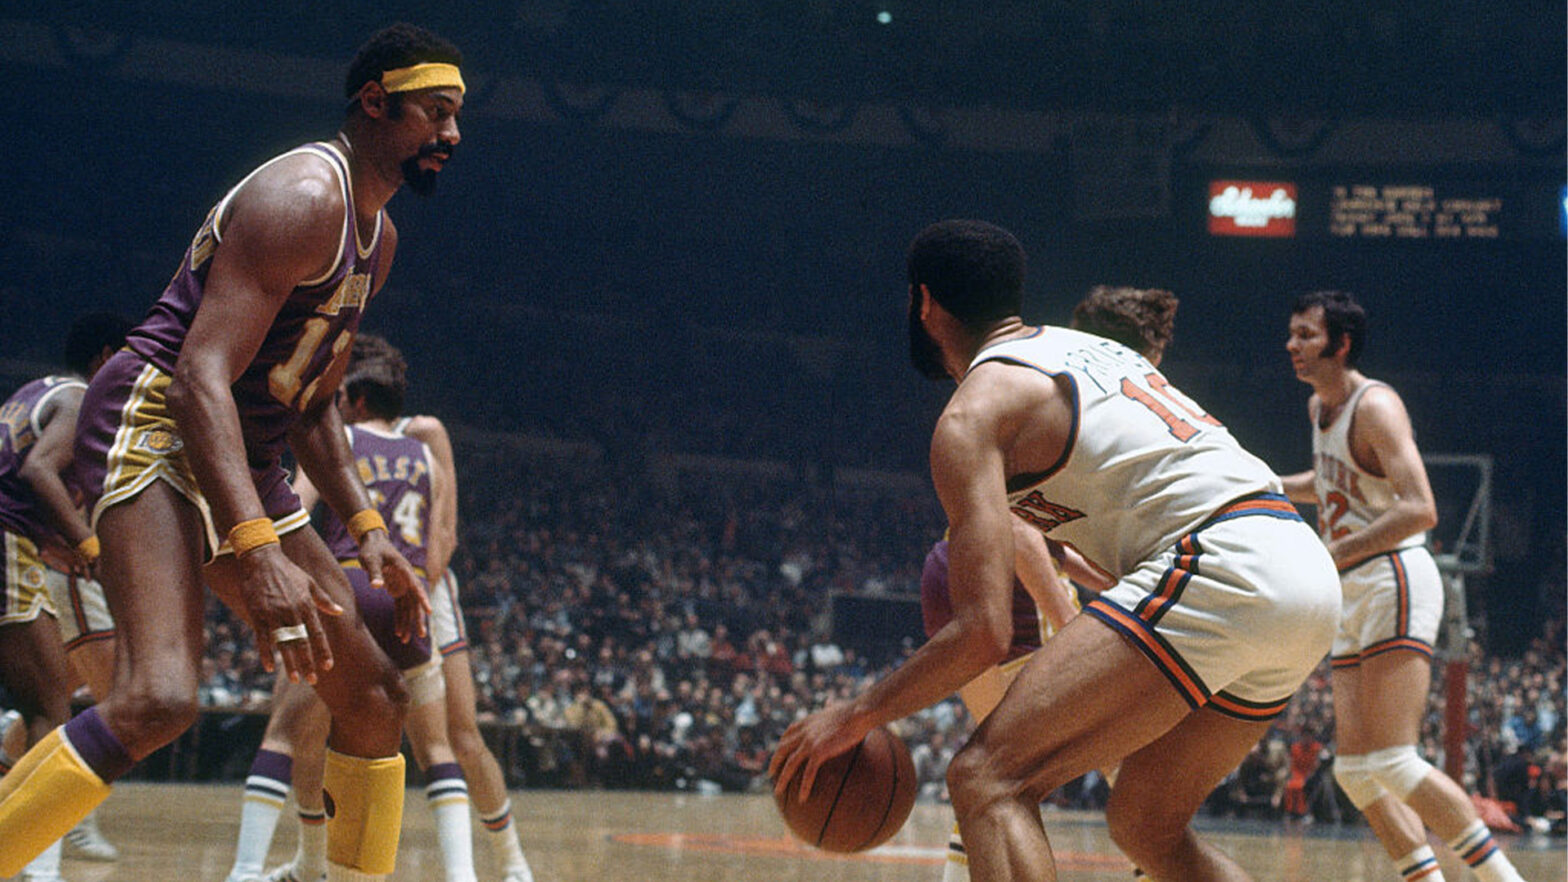 Wilt Chamberlain’s 1972 NBA Finals Jersey Sells For $4.9M, Becoming Third-Most Valuable NBA Jersey Ever Sold Publicly